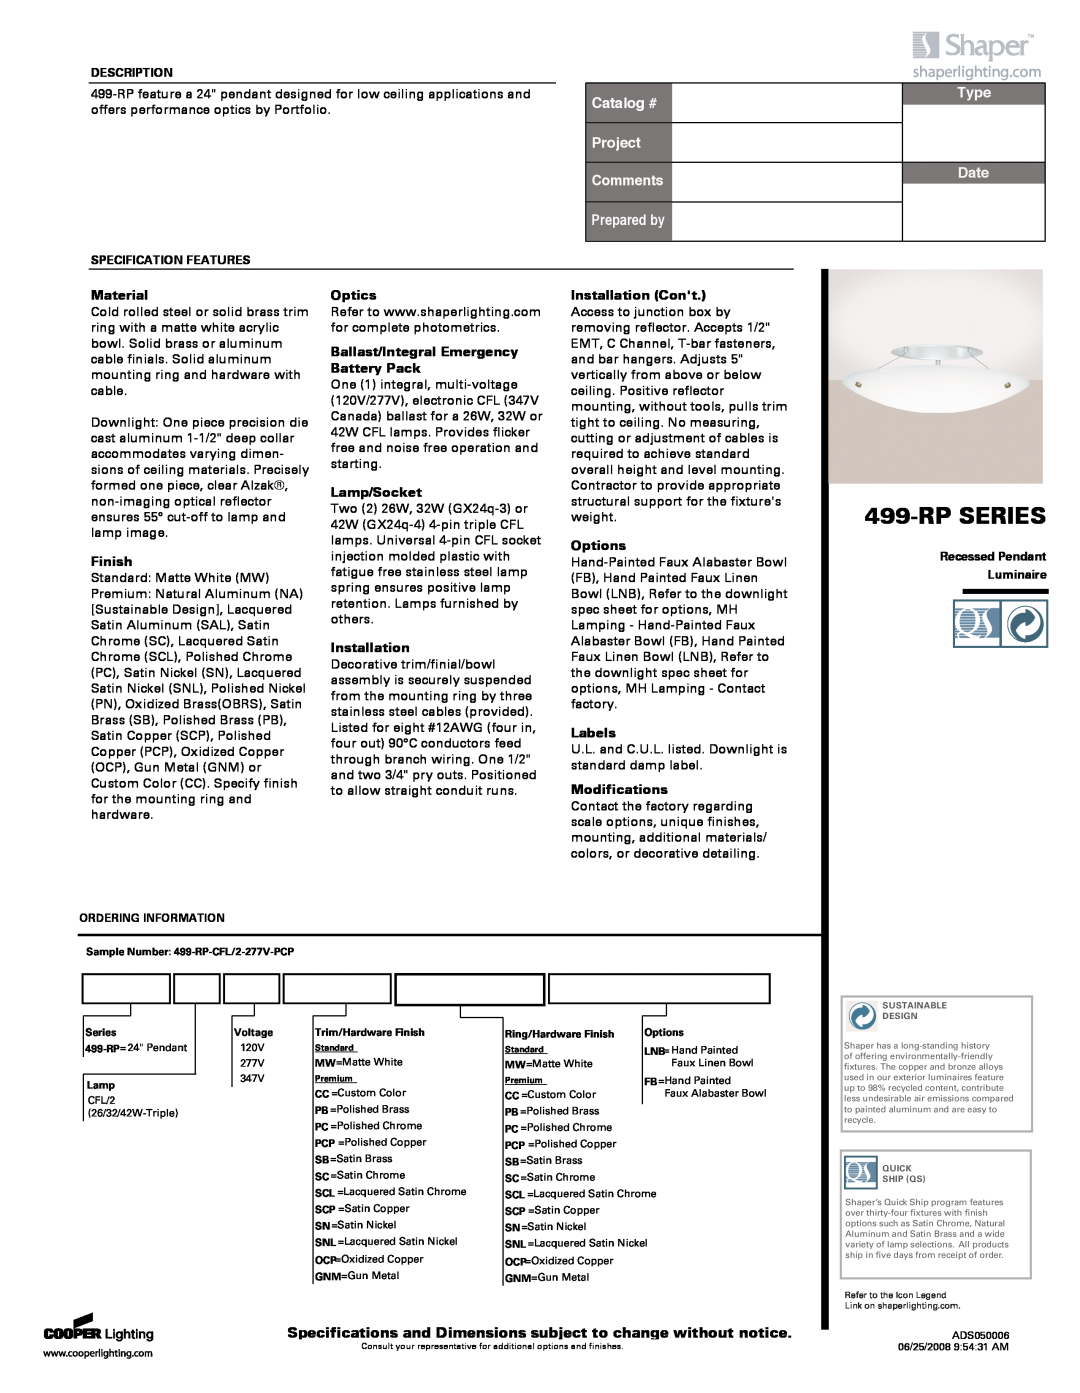 Cooper Lighting 499-RP specifications Rpseries, Catalog #, Project Comments, Prepared by, Type, Date 